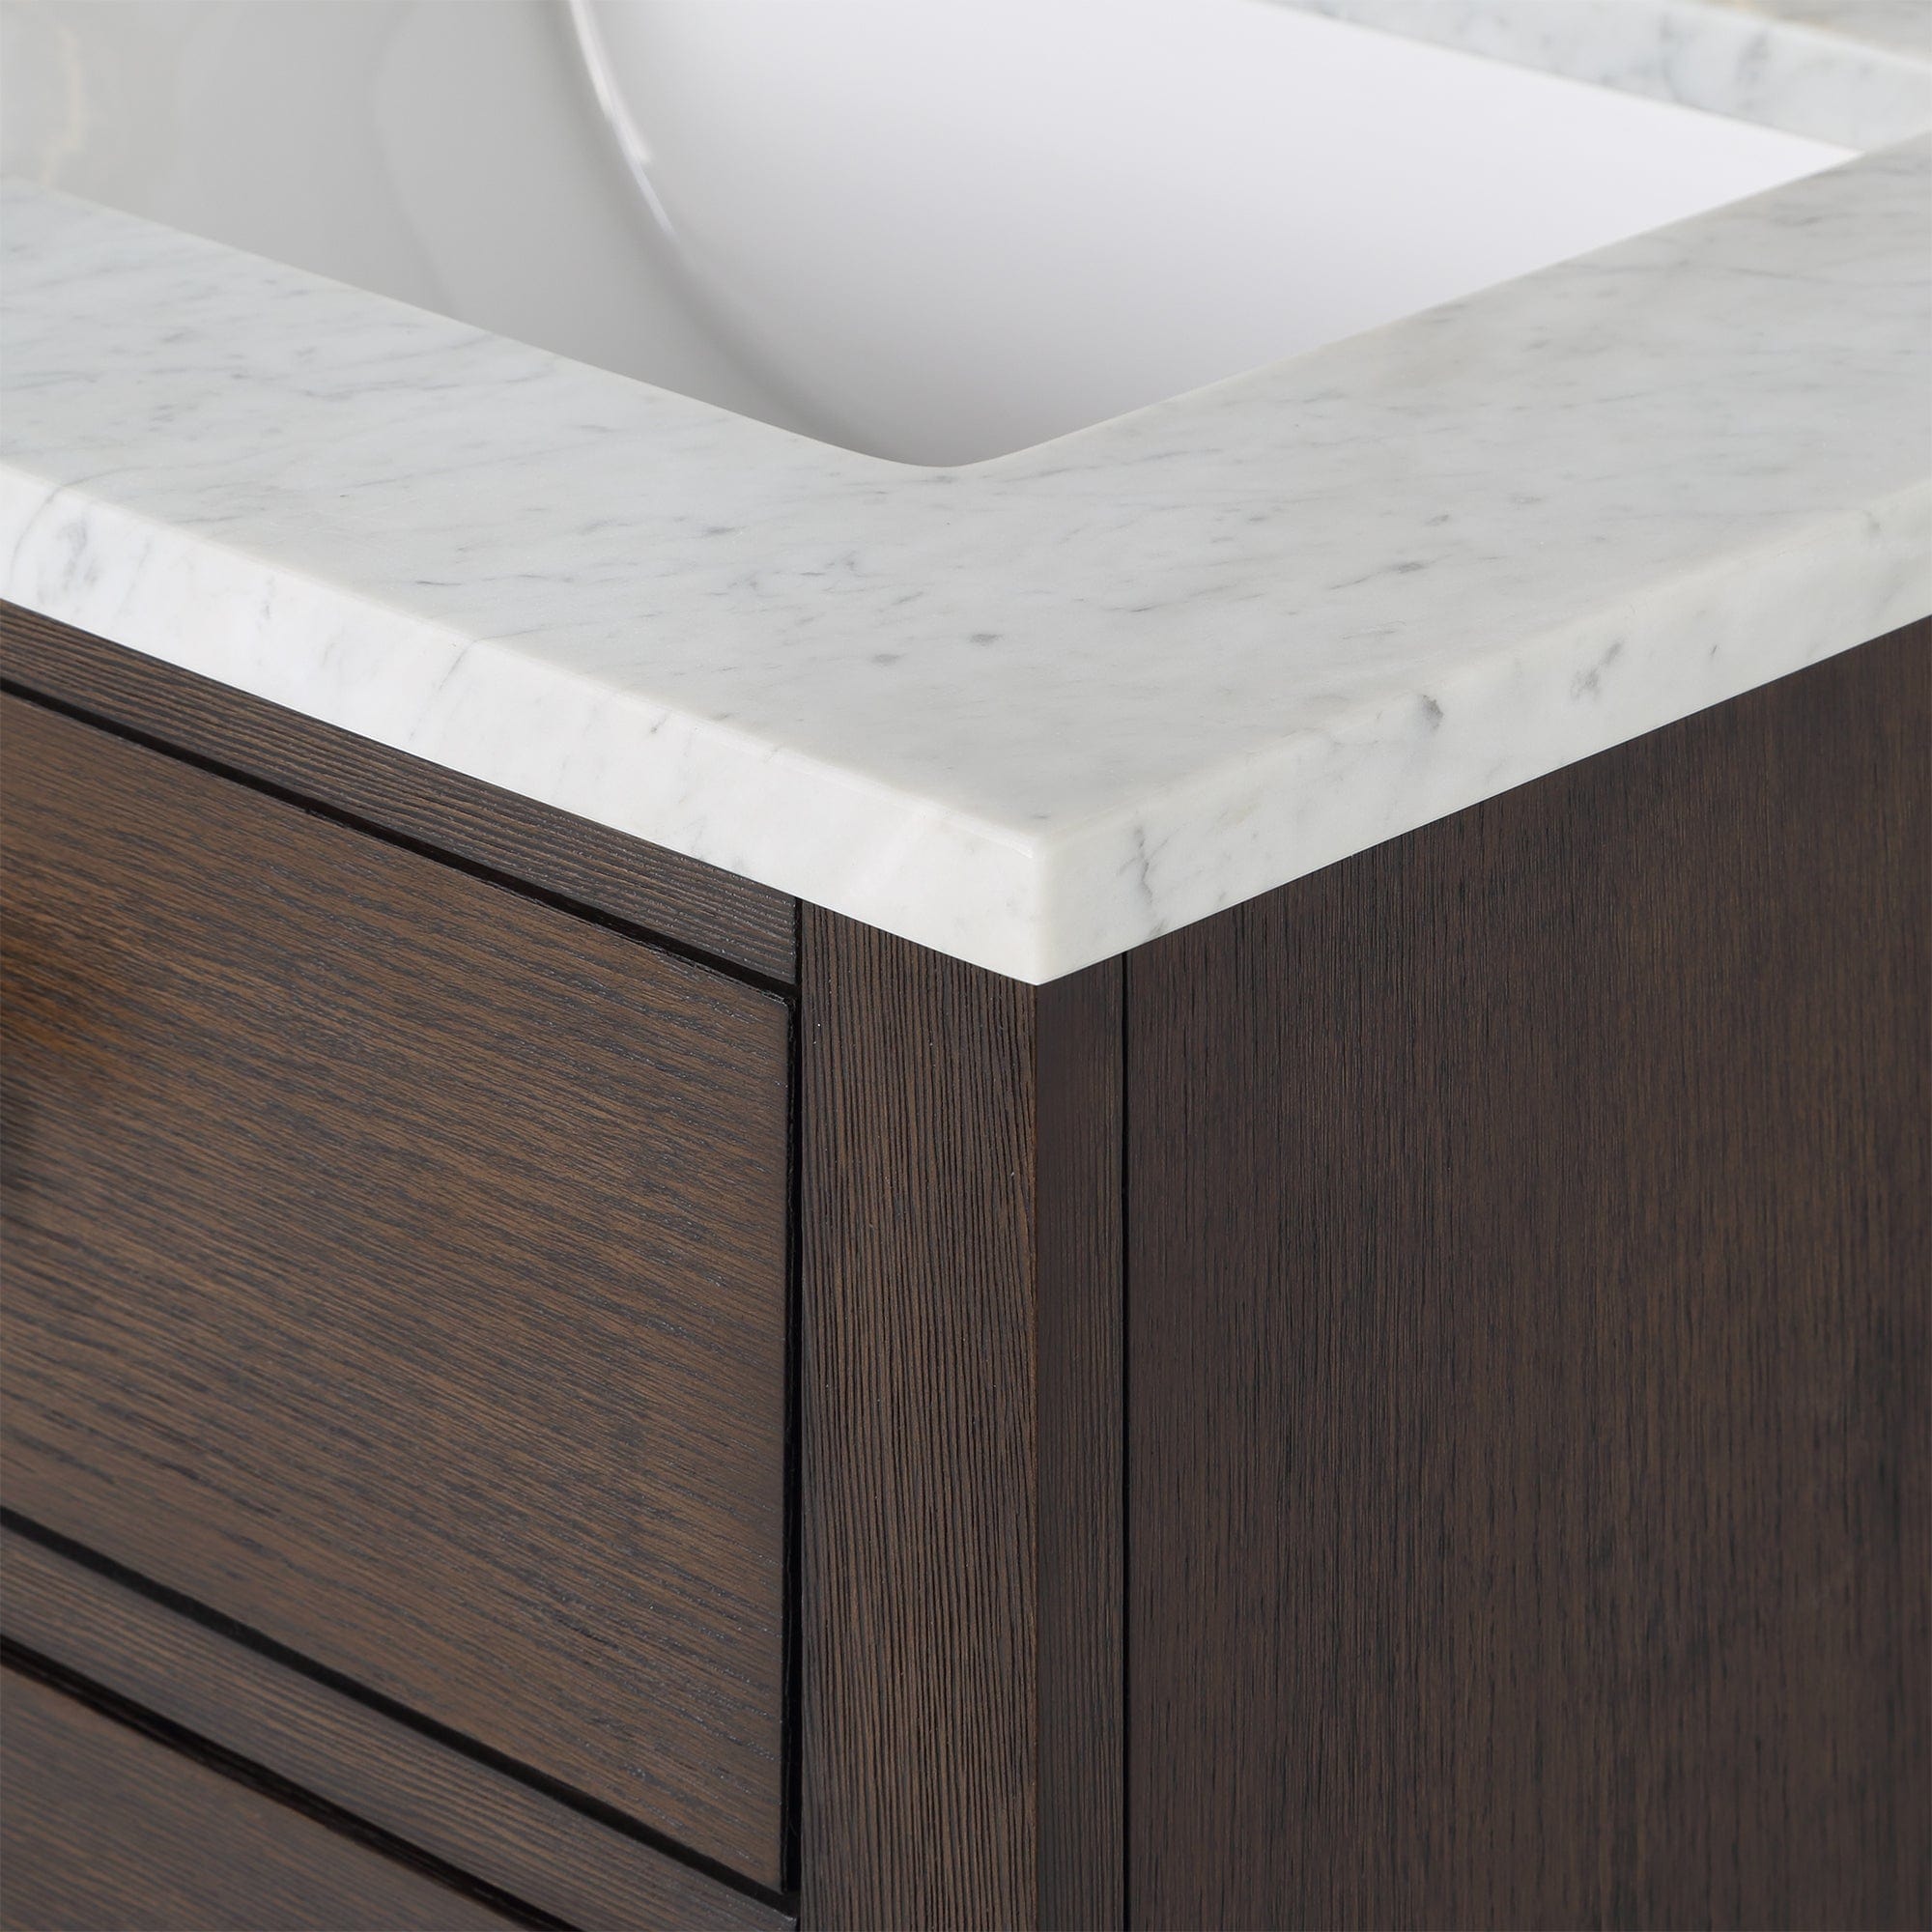 Chestnut 60 In. Double Sink Carrara White Marble Countertop Vanity In Brown Oak with Mirrors - Molaix732030764804CH60CW06BK-R21000000